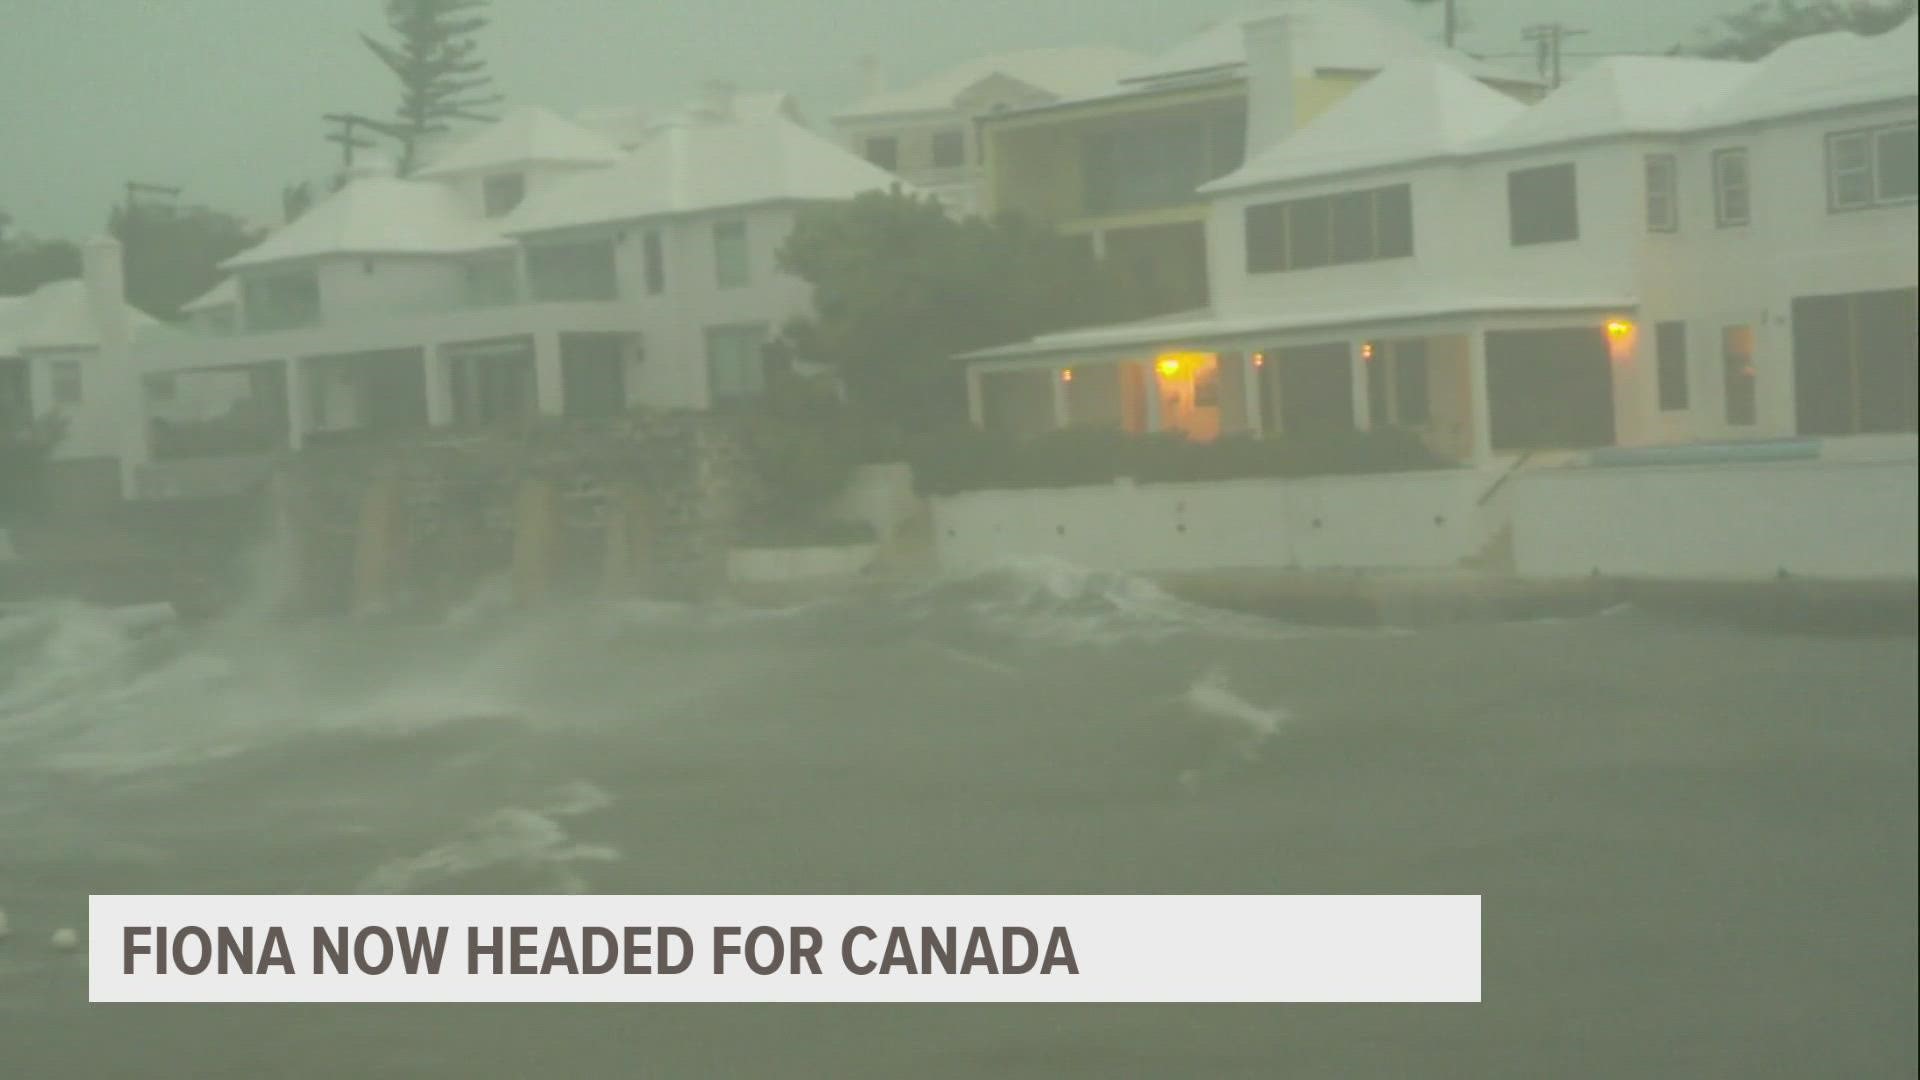 The Canadian Hurricane Centre issued a hurricane watch over extensive coastal expanses of Nova Scotia, Prince Edward Island and Newfoundland.